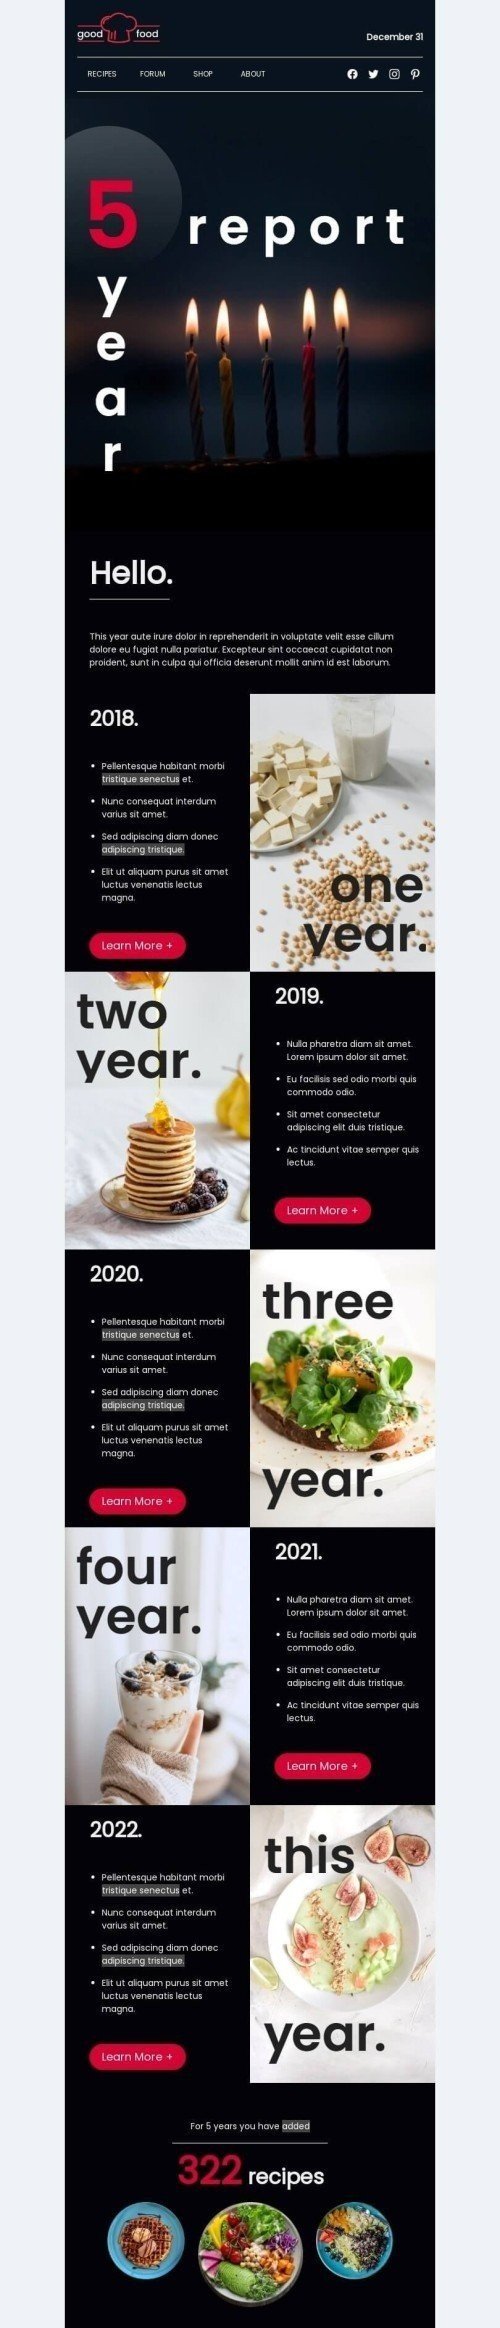 Annual Review Email Template "5 year report" for Food industry mobile view